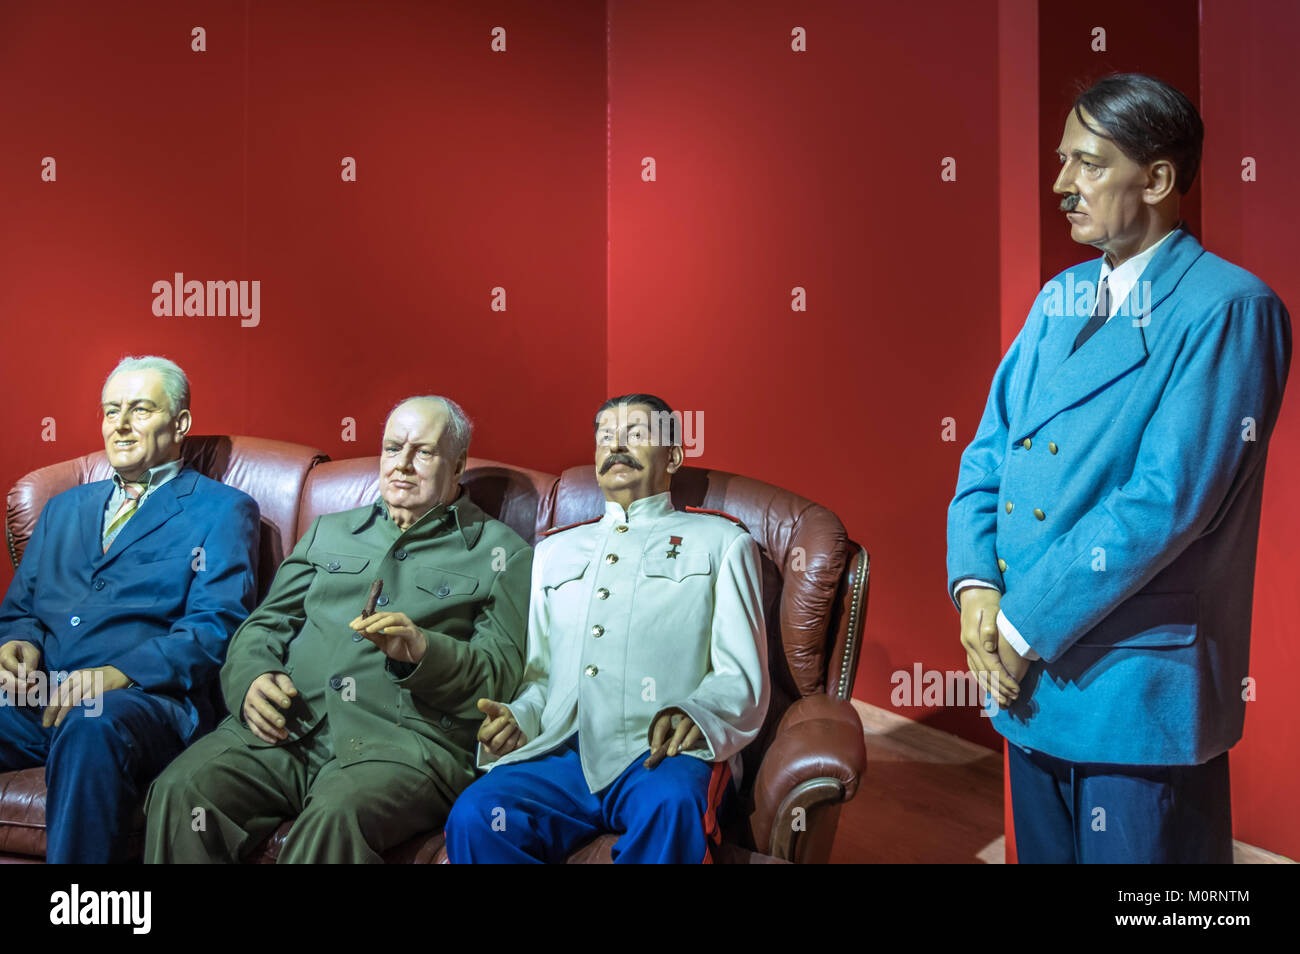 Wax statues of four powers Roosevelt, Churchill, Stalin and Hitler at the Krakow Wax Museum - Cracow, Poland. Stock Photo